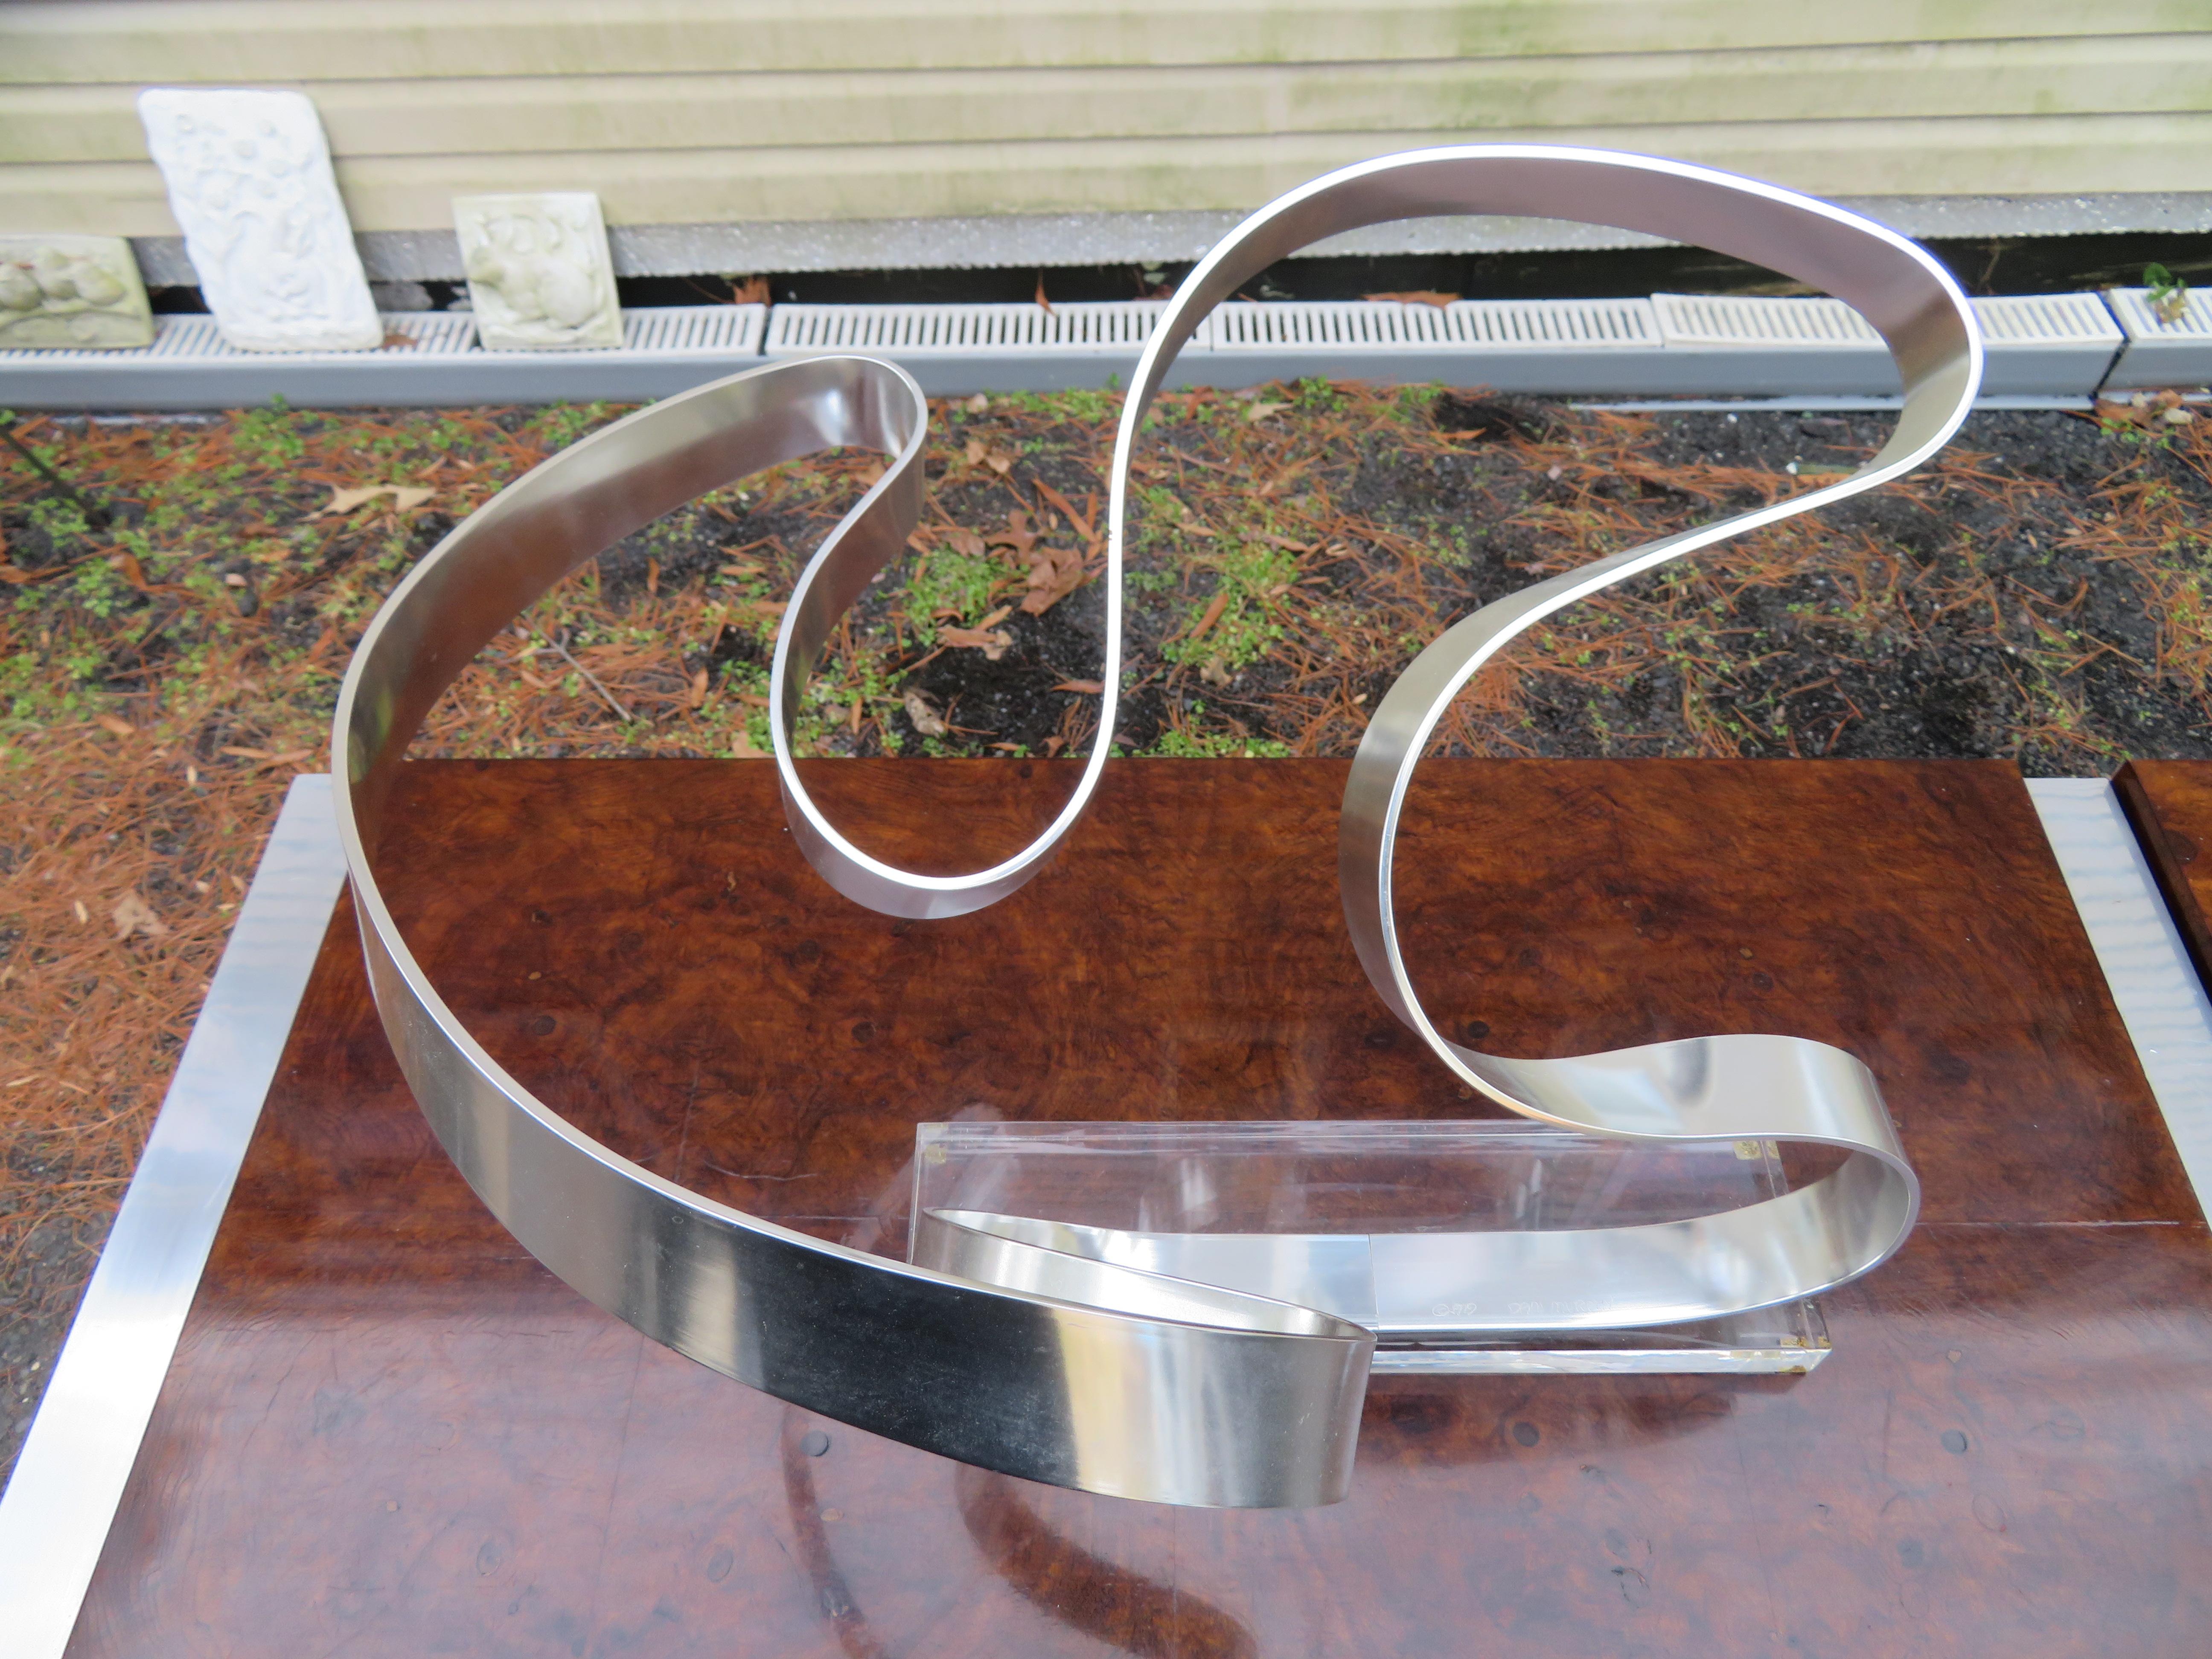 This fantastic sculpture was created by famed artist Dan Murphy in 1979. This abstract aluminum ribbon sculpture is mounted on a rectangular lucite base. This sculpture measures 13